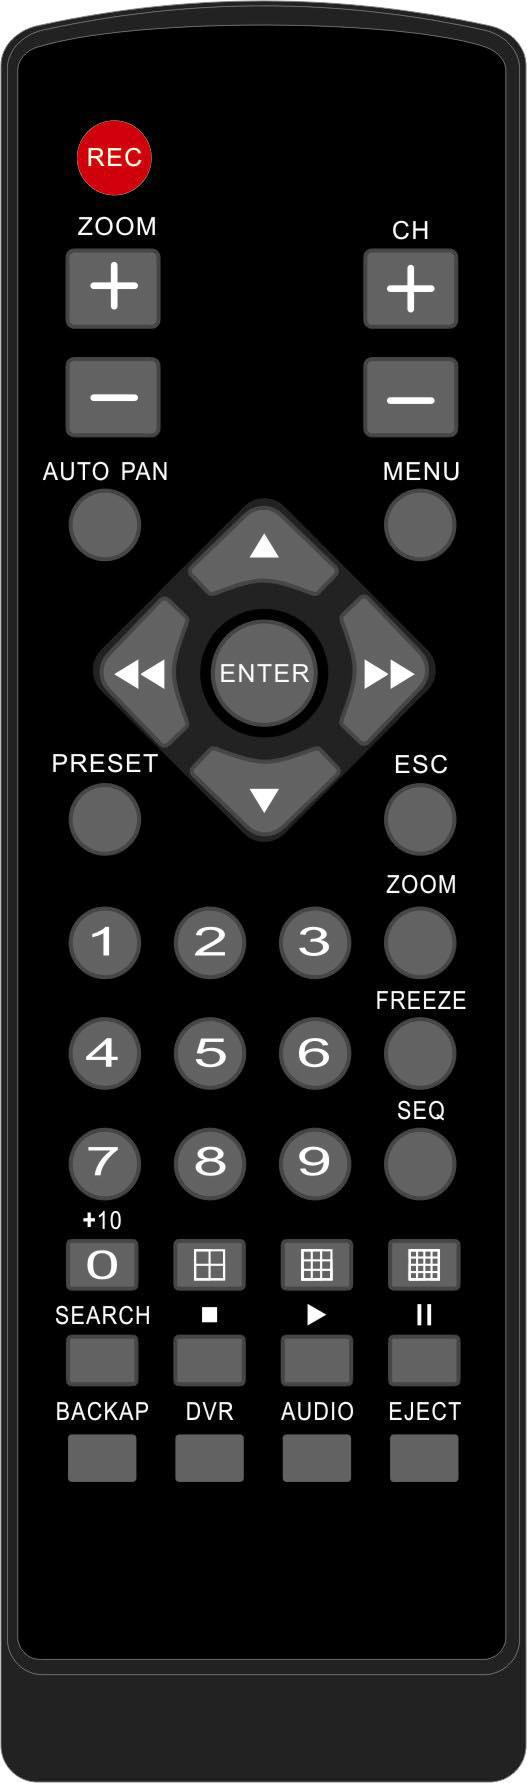 Chapter 1-4. Remote controller The button arrangement of the remote controller is designed for easy-to-use purposes.